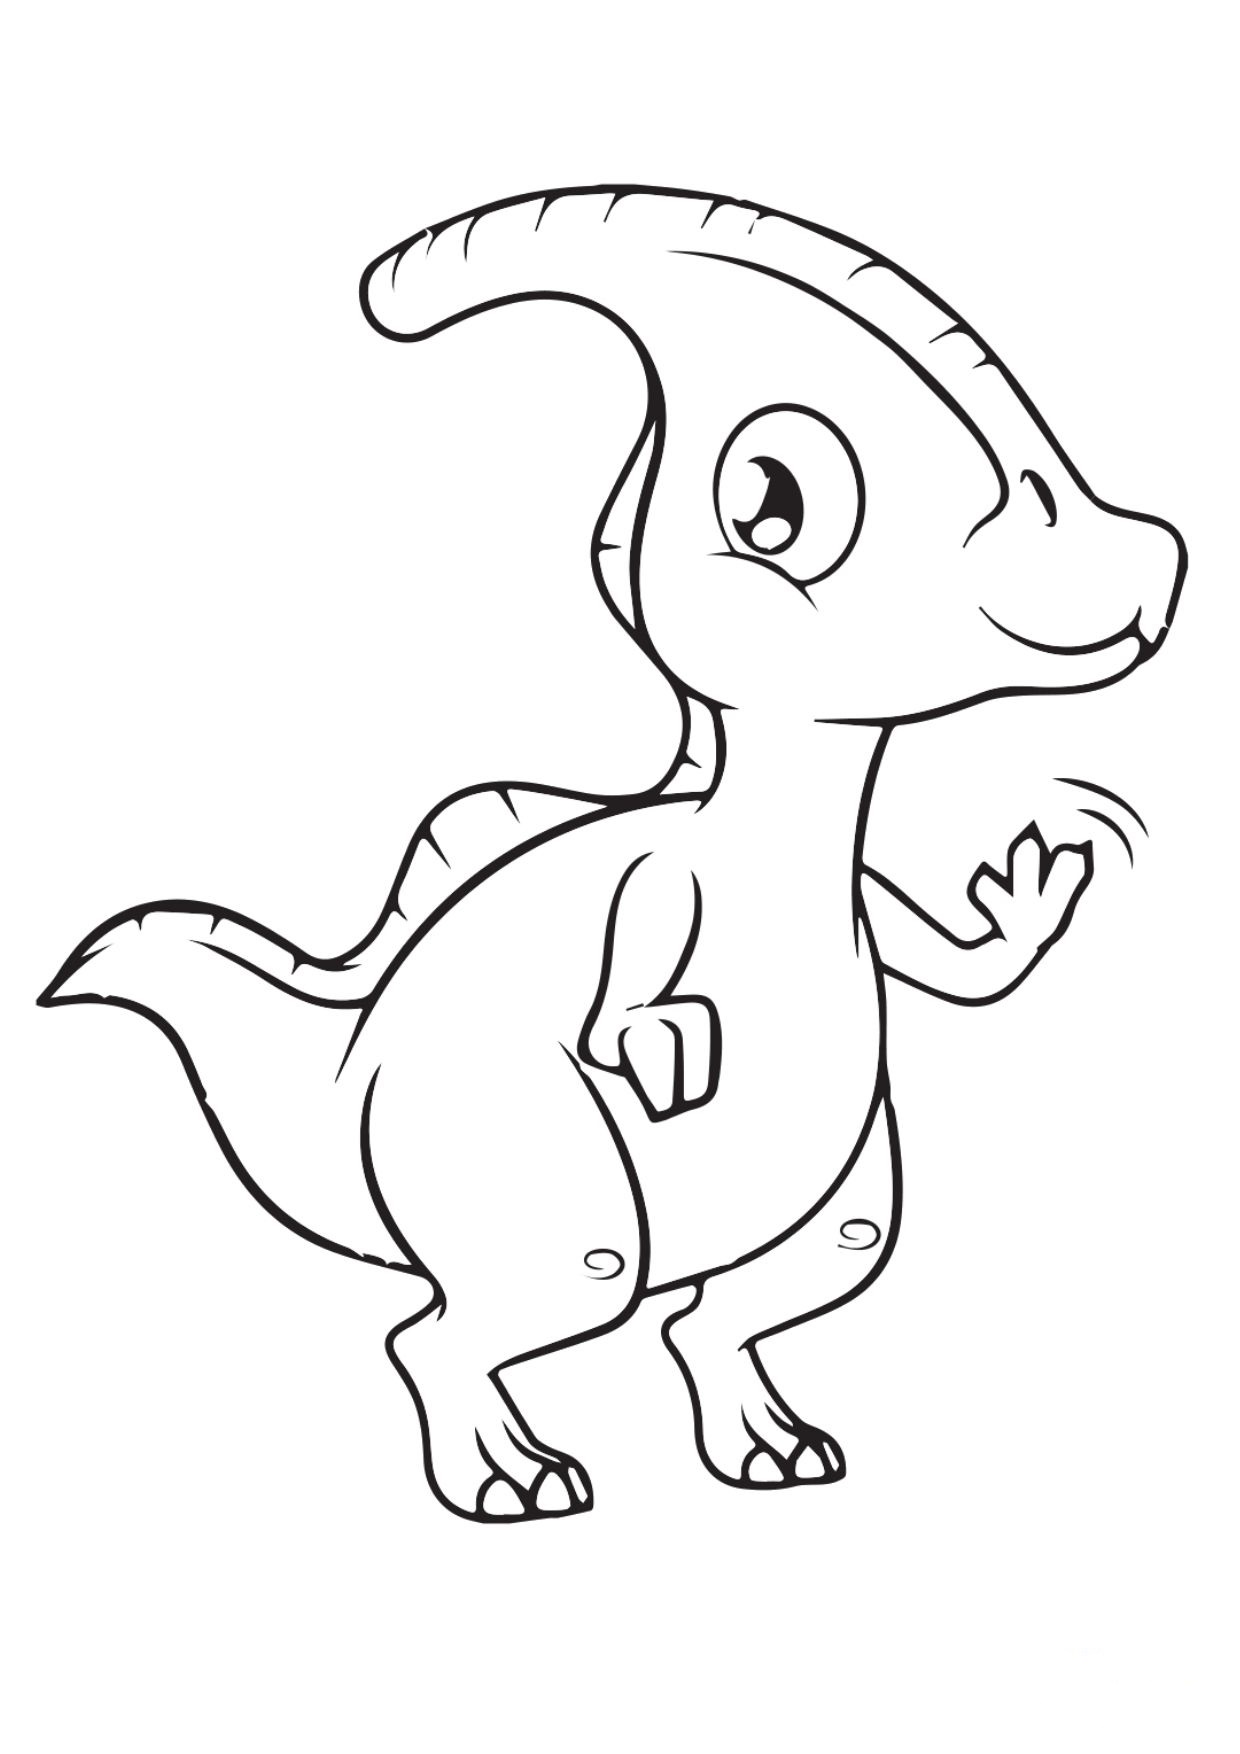 baby parasaurolophus coloring pages